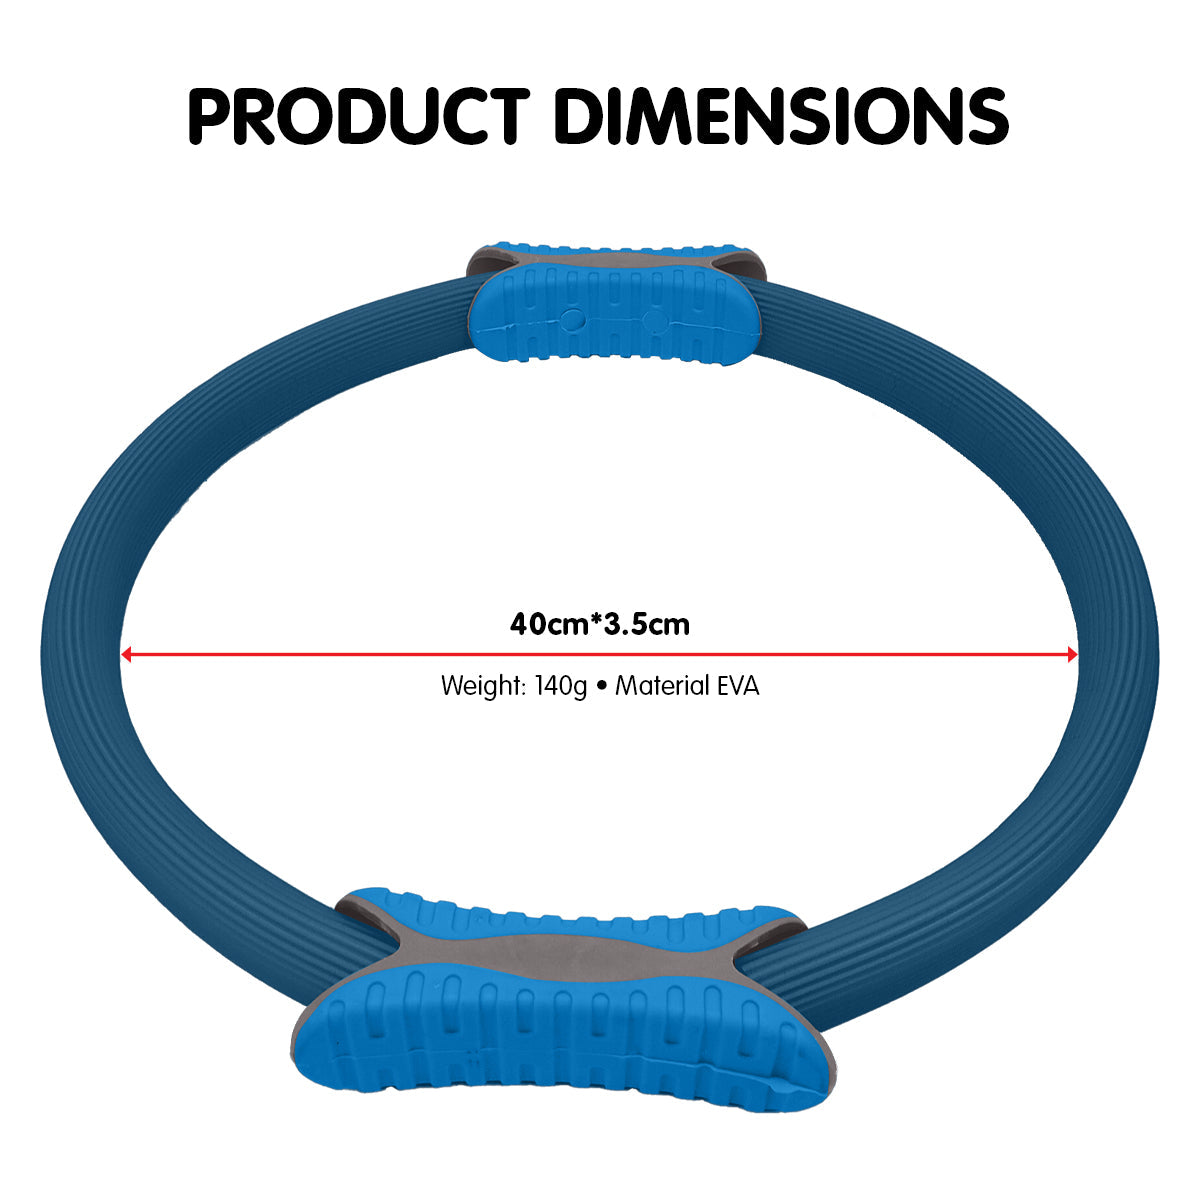 Sports & Fitness > Fitness Accessories - Powertrain Pilates Ring Band Yoga Home Workout Exercise Band Blue